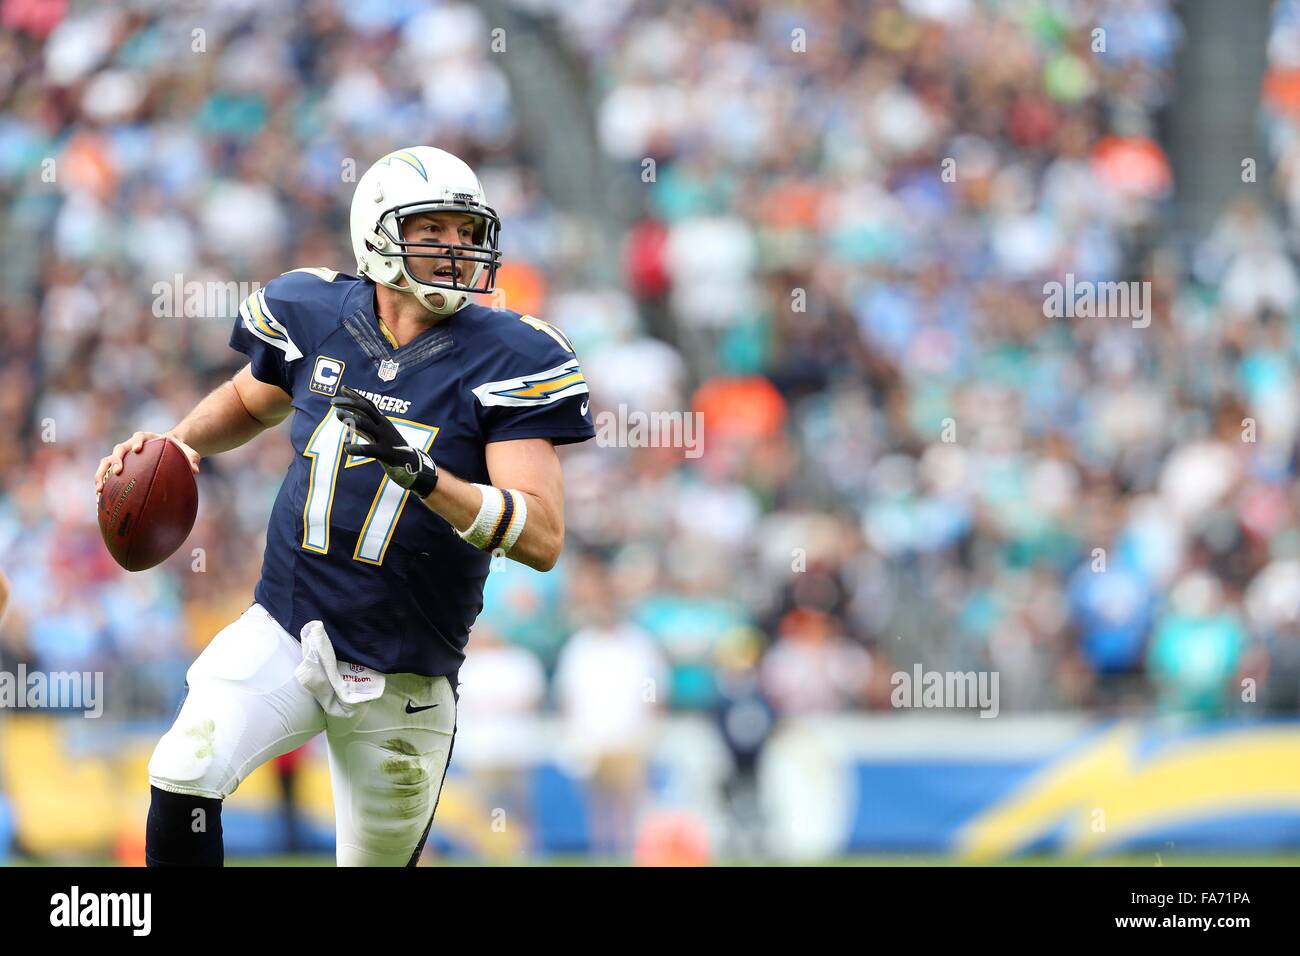 December 20, 2015 San Diego Chargers quarterback Philip Rivers #17 in action during the NFL Football game between the Miami Dolphins and the San Diego Chargers at the Qualcomm Stadium in San Diego, California. The Chargers defeated the Dolphins 30-14.Charles Baus/CSM Stock Photo